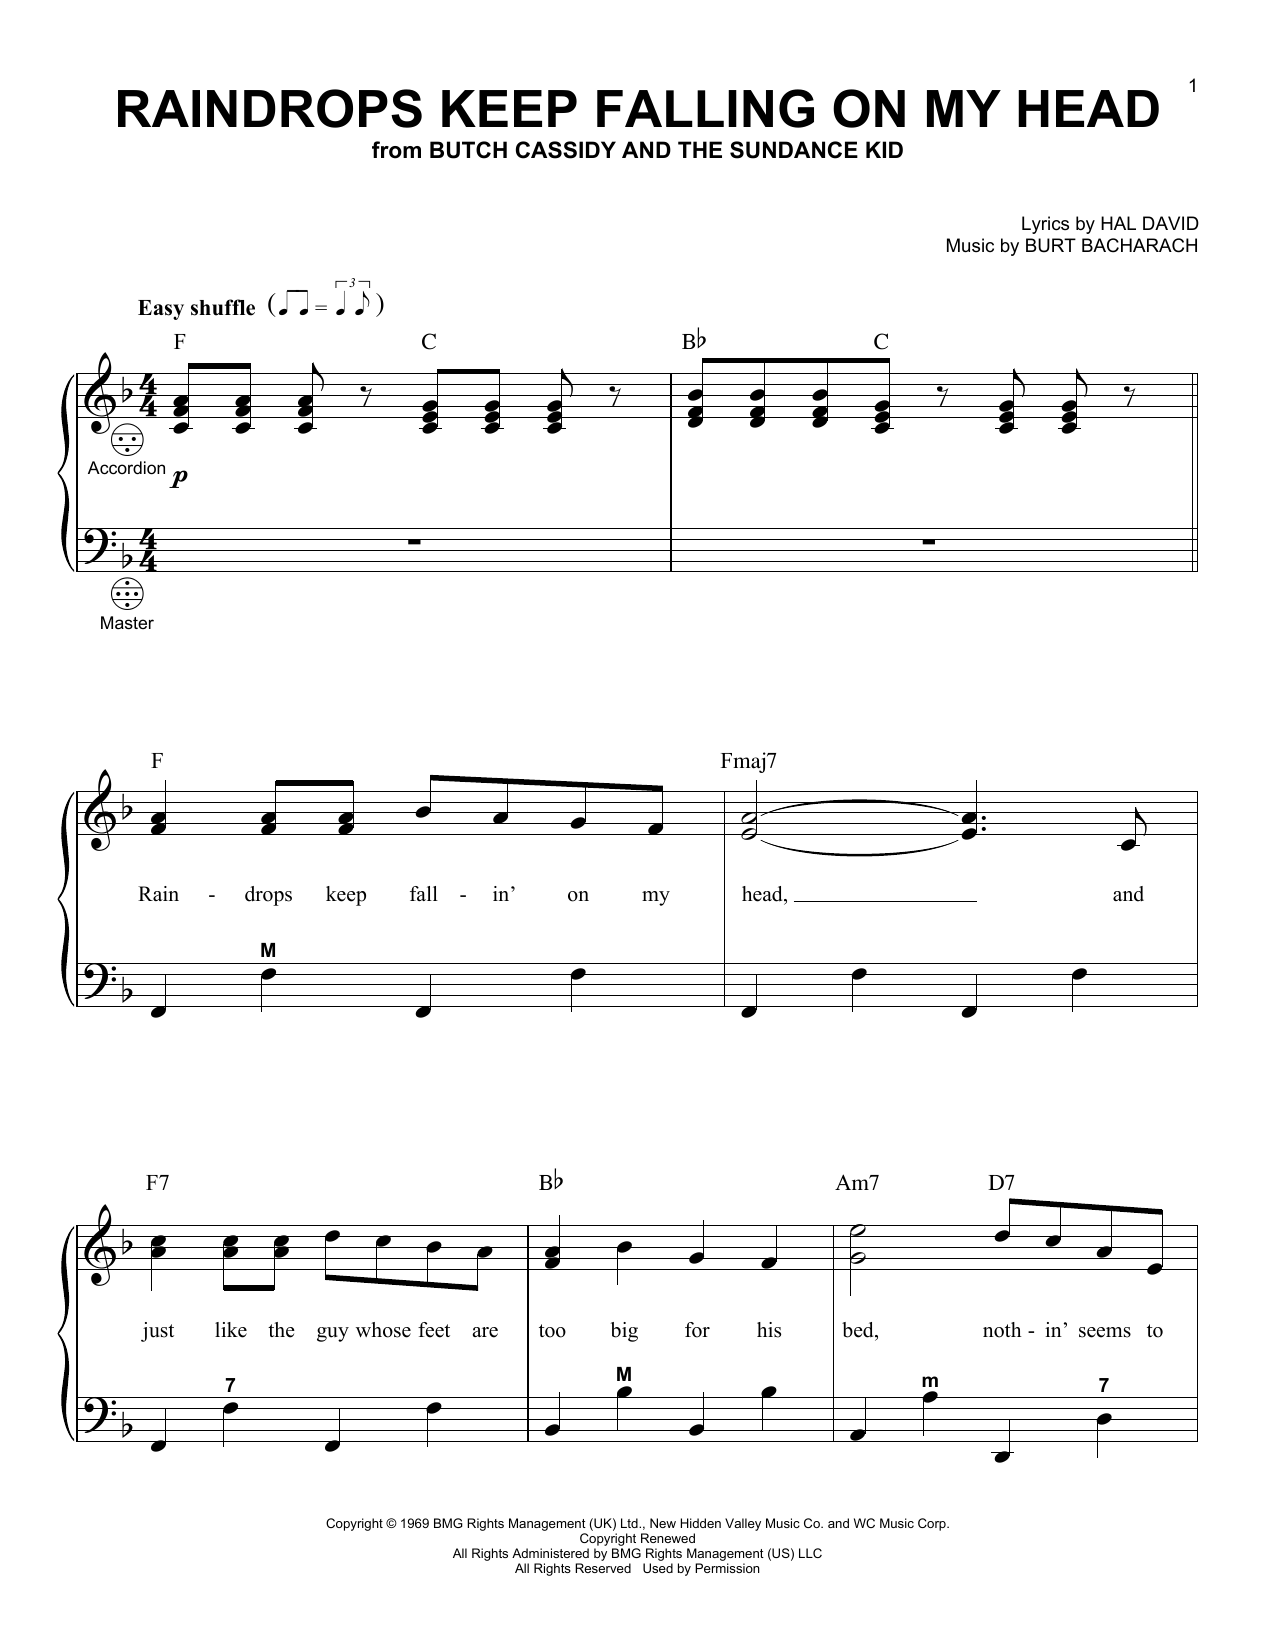 B.J. Thomas Raindrops Keep Fallin' On My Head sheet music preview music notes and score for Piano, Vocal & Guitar (Right-Hand Melody) including 3 page(s)